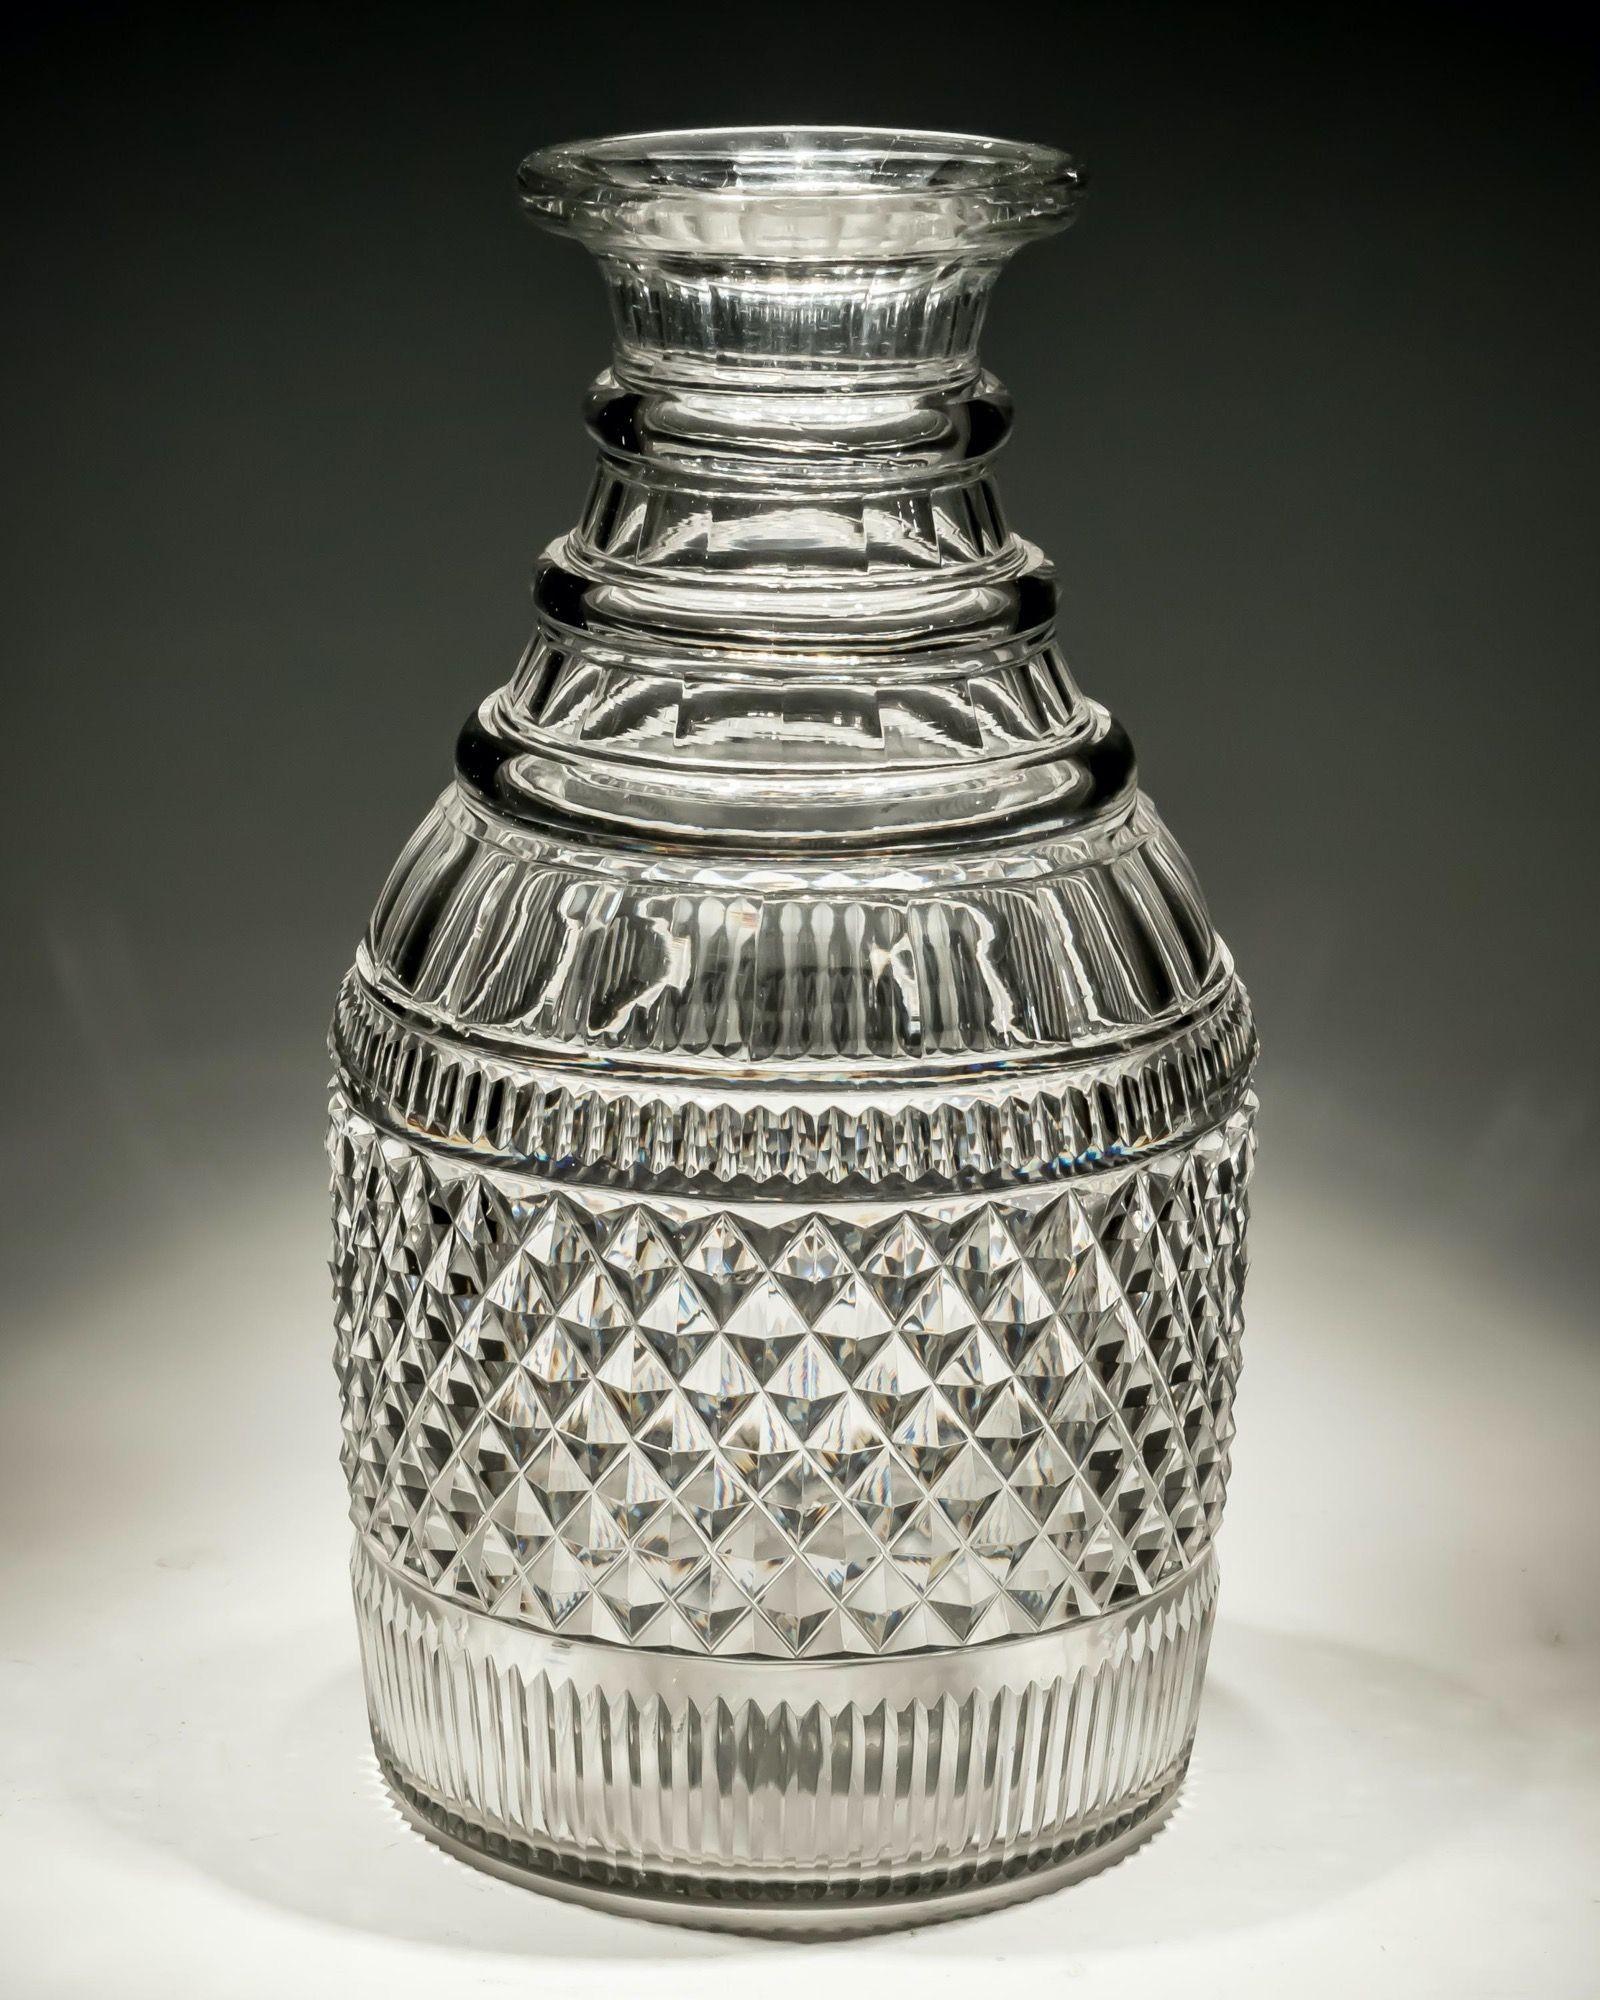 A Regency magnum carafe with diamond, slice and flute cutting.
Measures: Height 24.5 cm (9 3/4